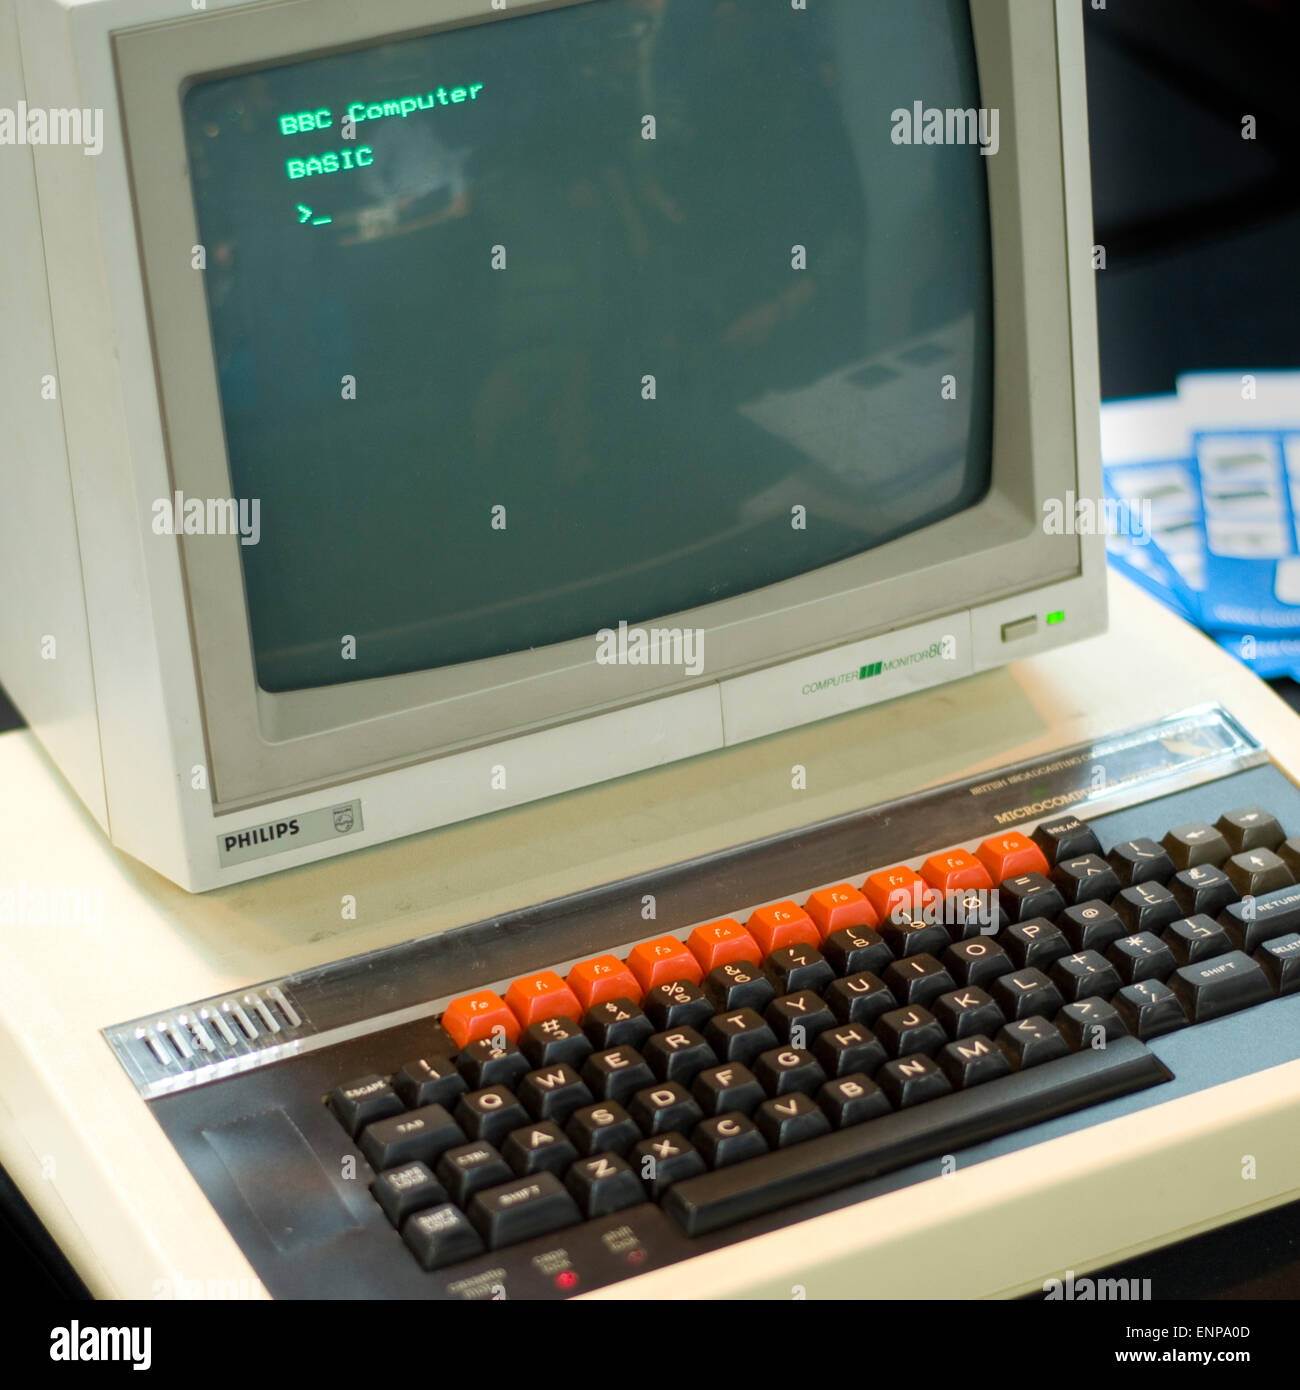 A vintage BBC Micro computer (beeb) from the 1980's Stock Photo